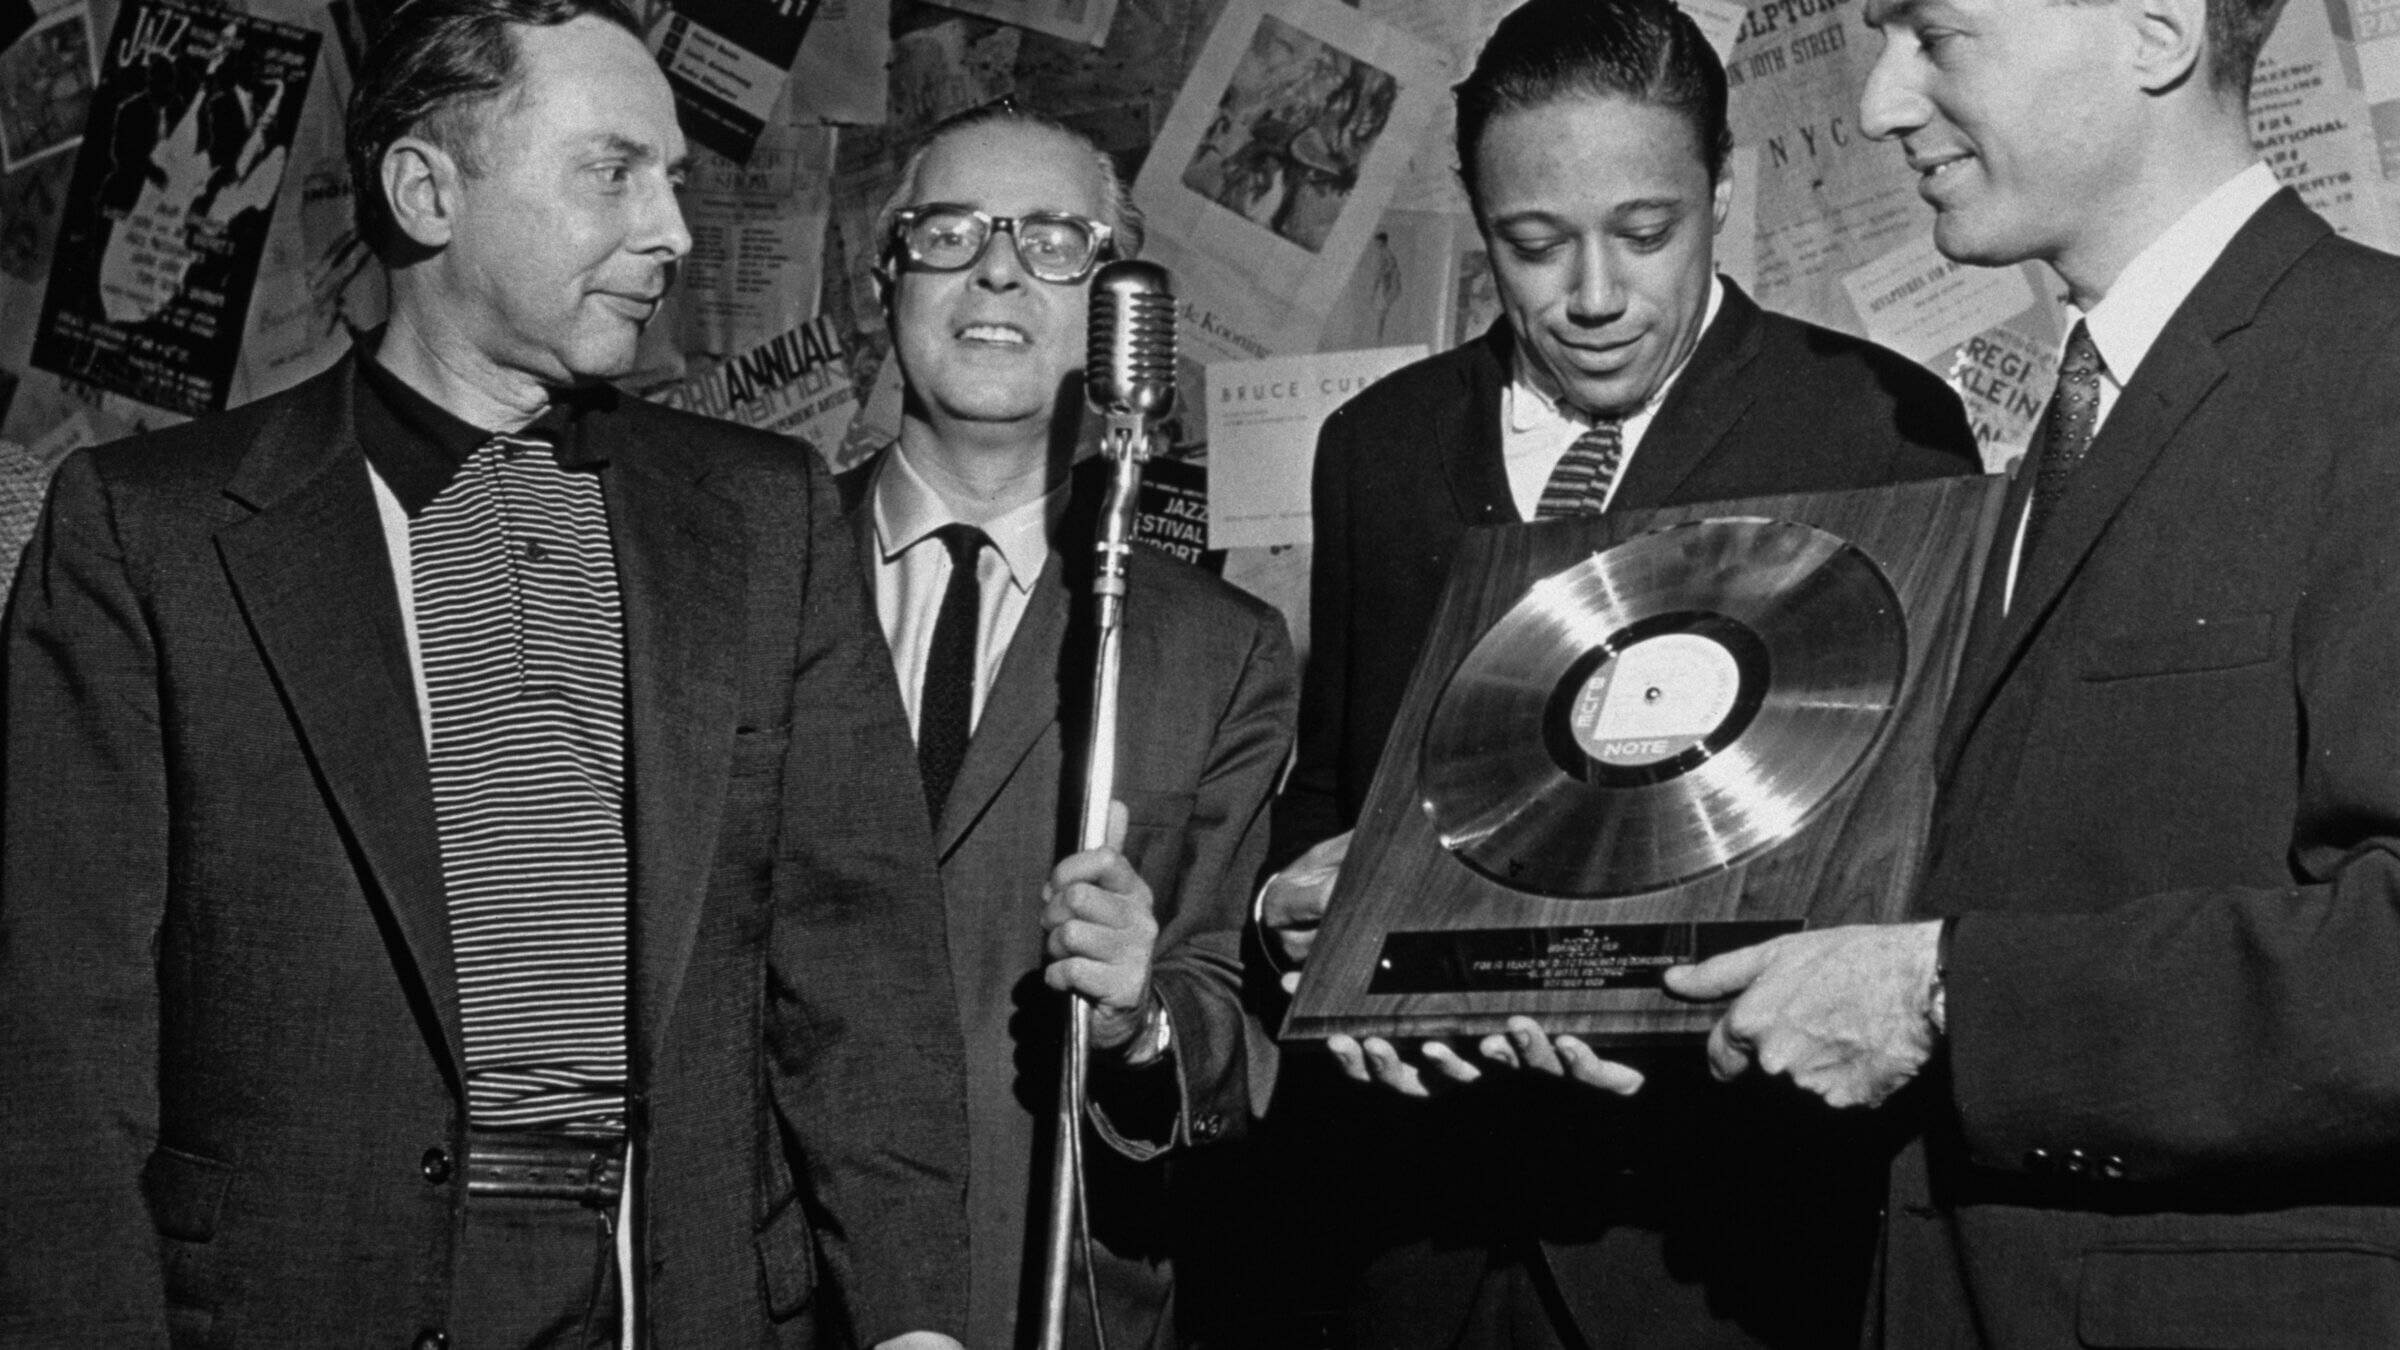 Jazz pianist Horace Silver, second from right, receives an award from Blue Note records in 1959. Blue Note co-founder Alfred Lion, is second from left.